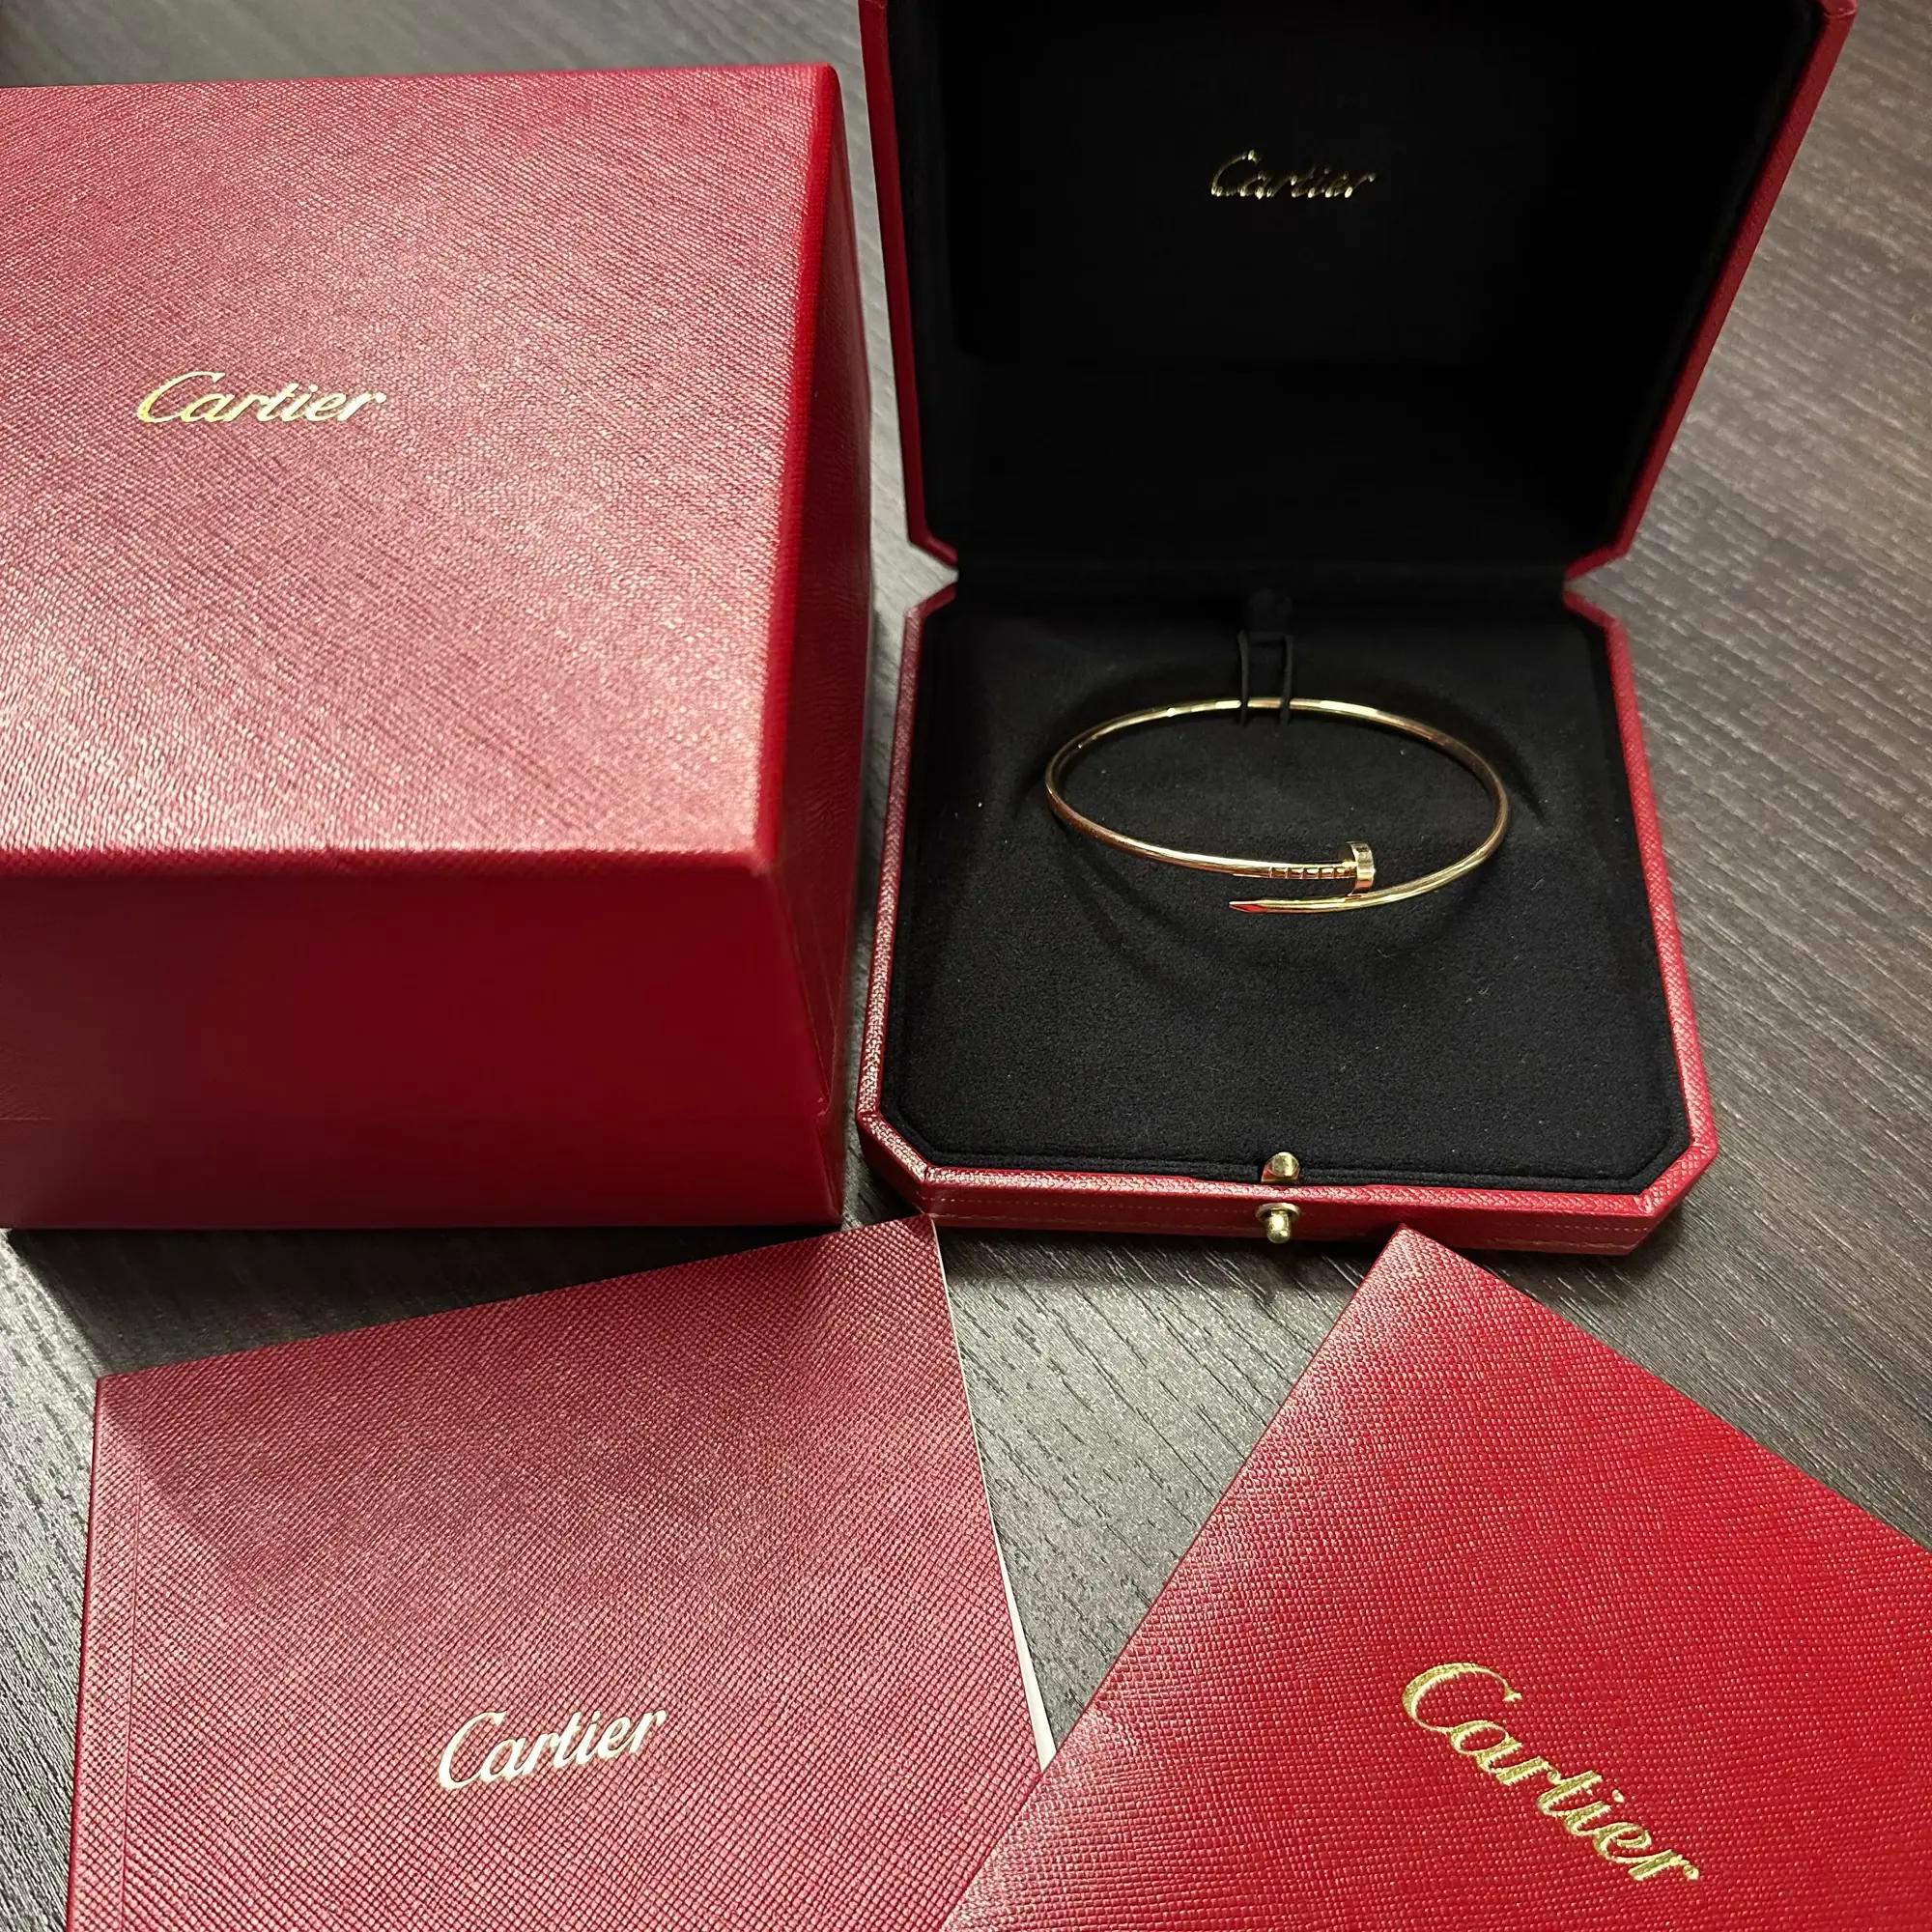 Cartier Juste un Clou bracelet. Small model. Crafted in 18K rose gold. Width: 2.5mm. Size 19. Total weight: 10.55 grams. Excellent preowned condition. Comes with the original box and papers. 
